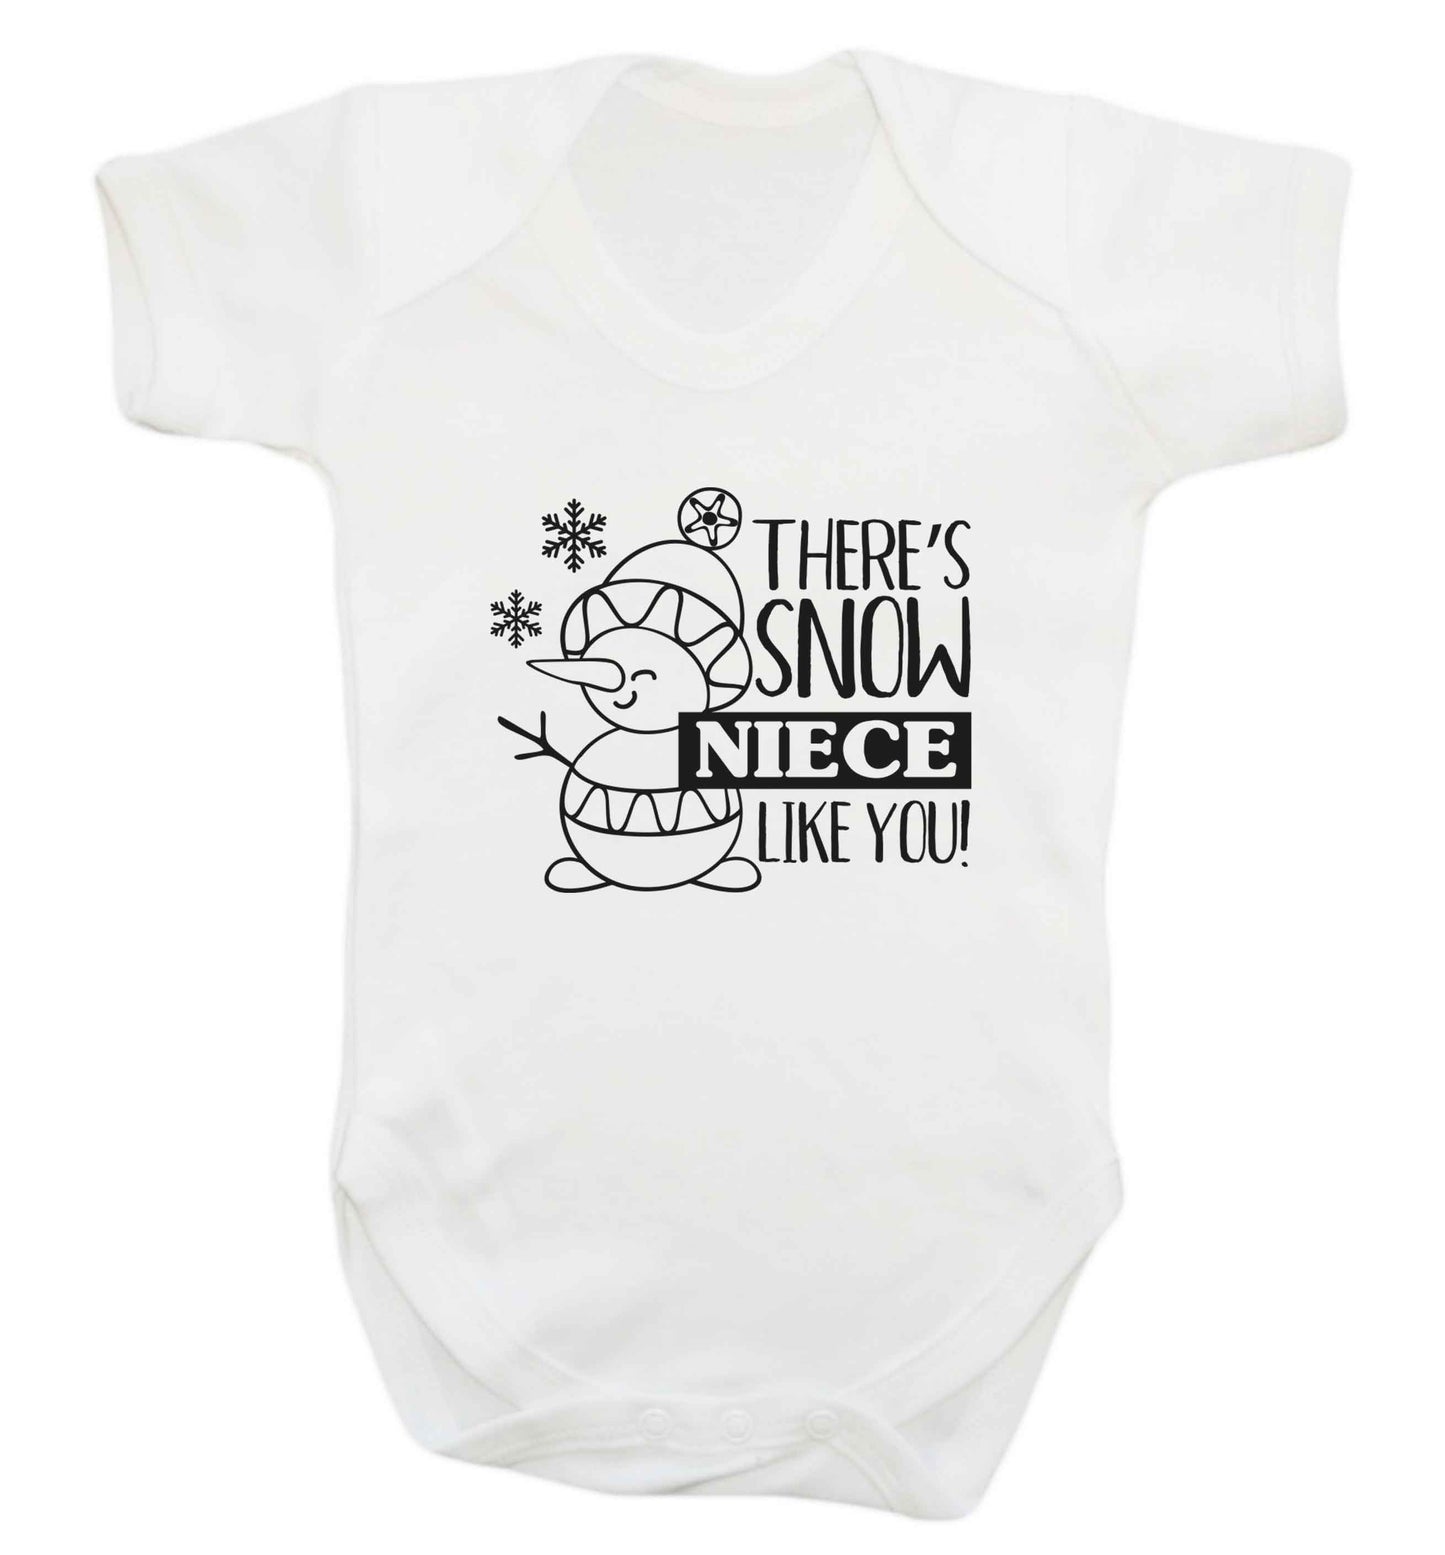 There's snow niece like you baby vest white 18-24 months